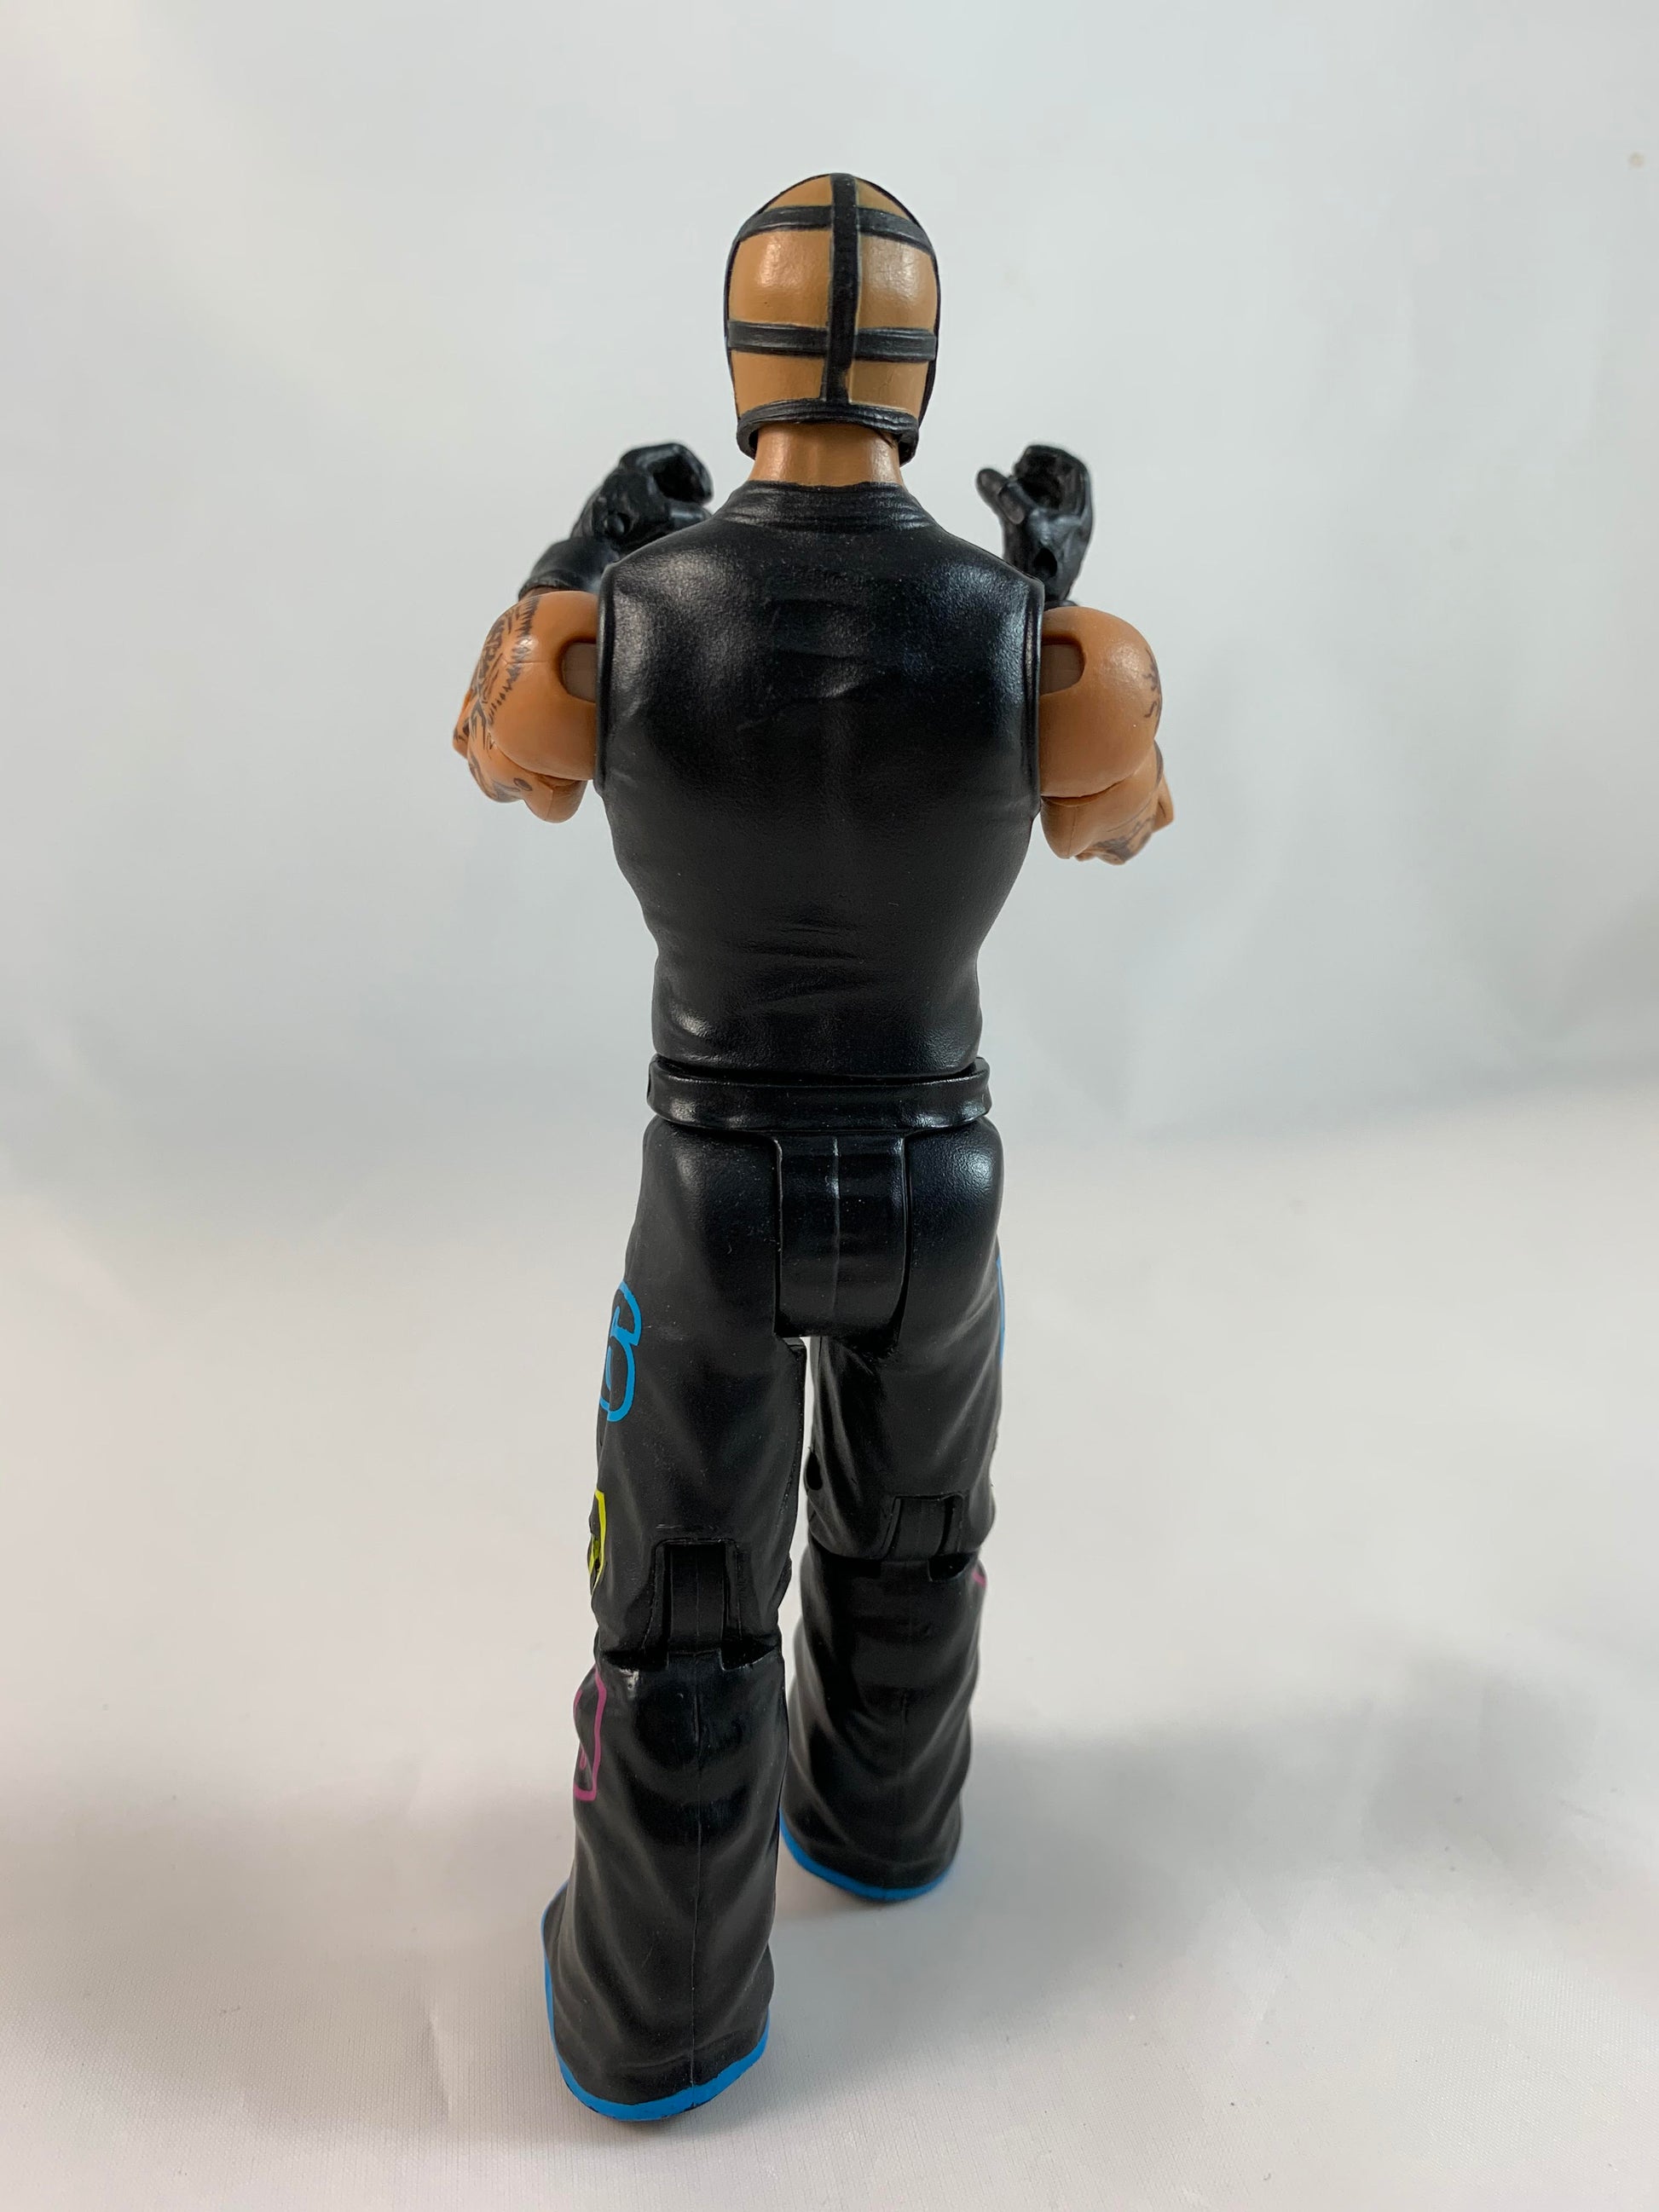 2011 Rey Mysterio WWE WRESTLING Action Figure 619 Black Outfit and Mask Mattel - Loose Action Figure